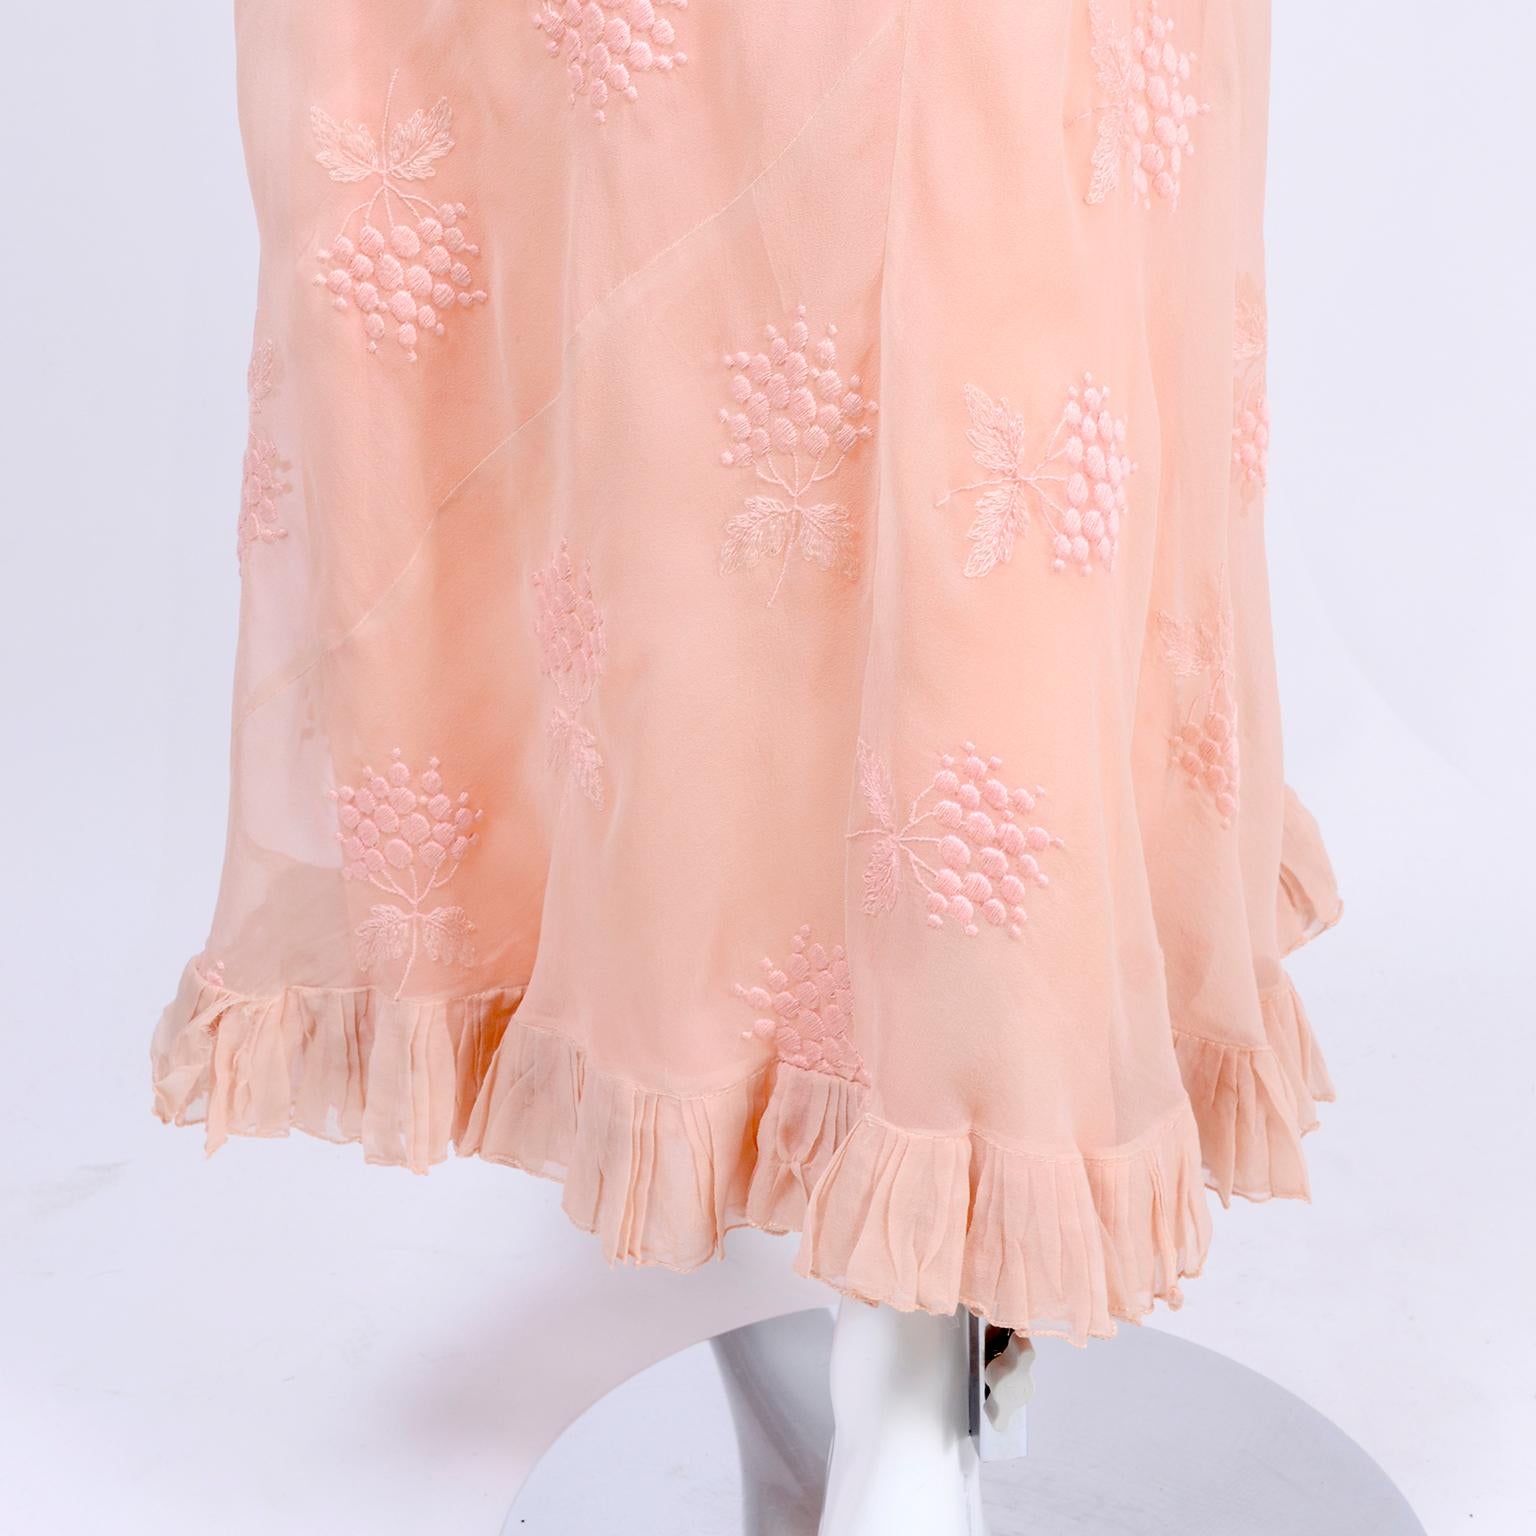 Women's Vintage Bias Cut 1930s Dress With Embroidery in Pink Silk Chiffon 